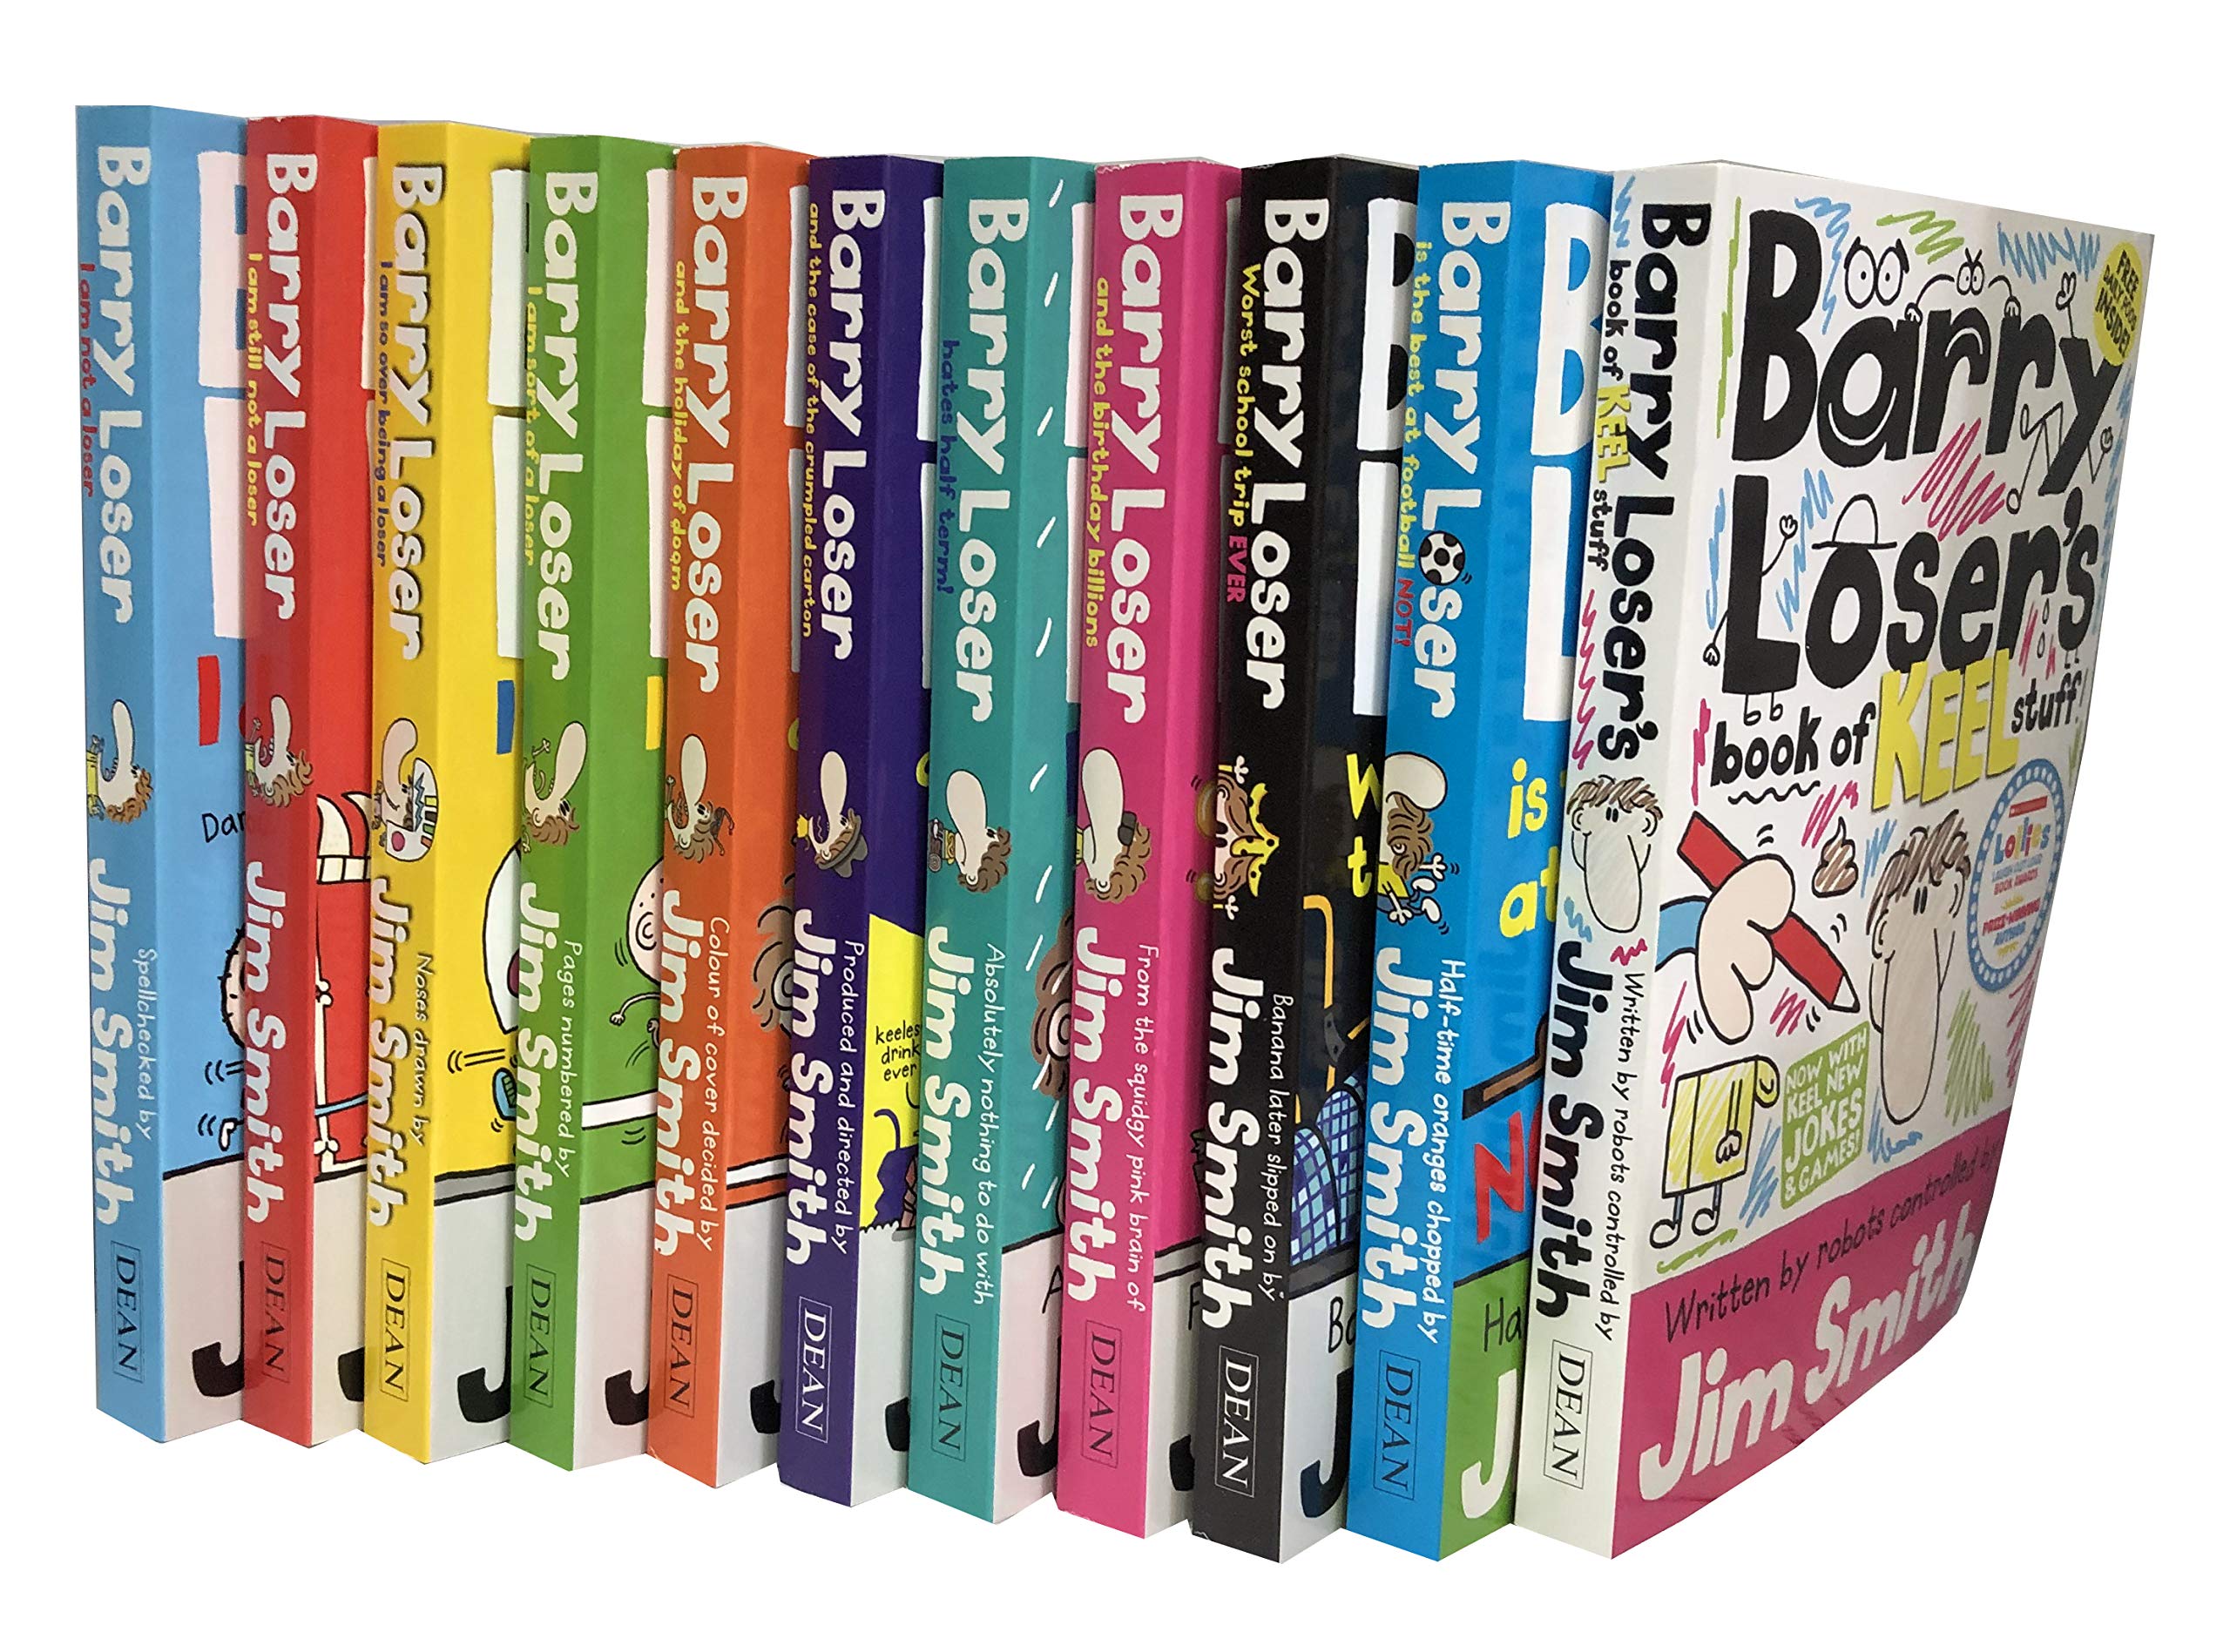 Jim Smith 11 Books Collection Set Barry Loser Series I am still not a Loser Paperback - Lets Buy Books